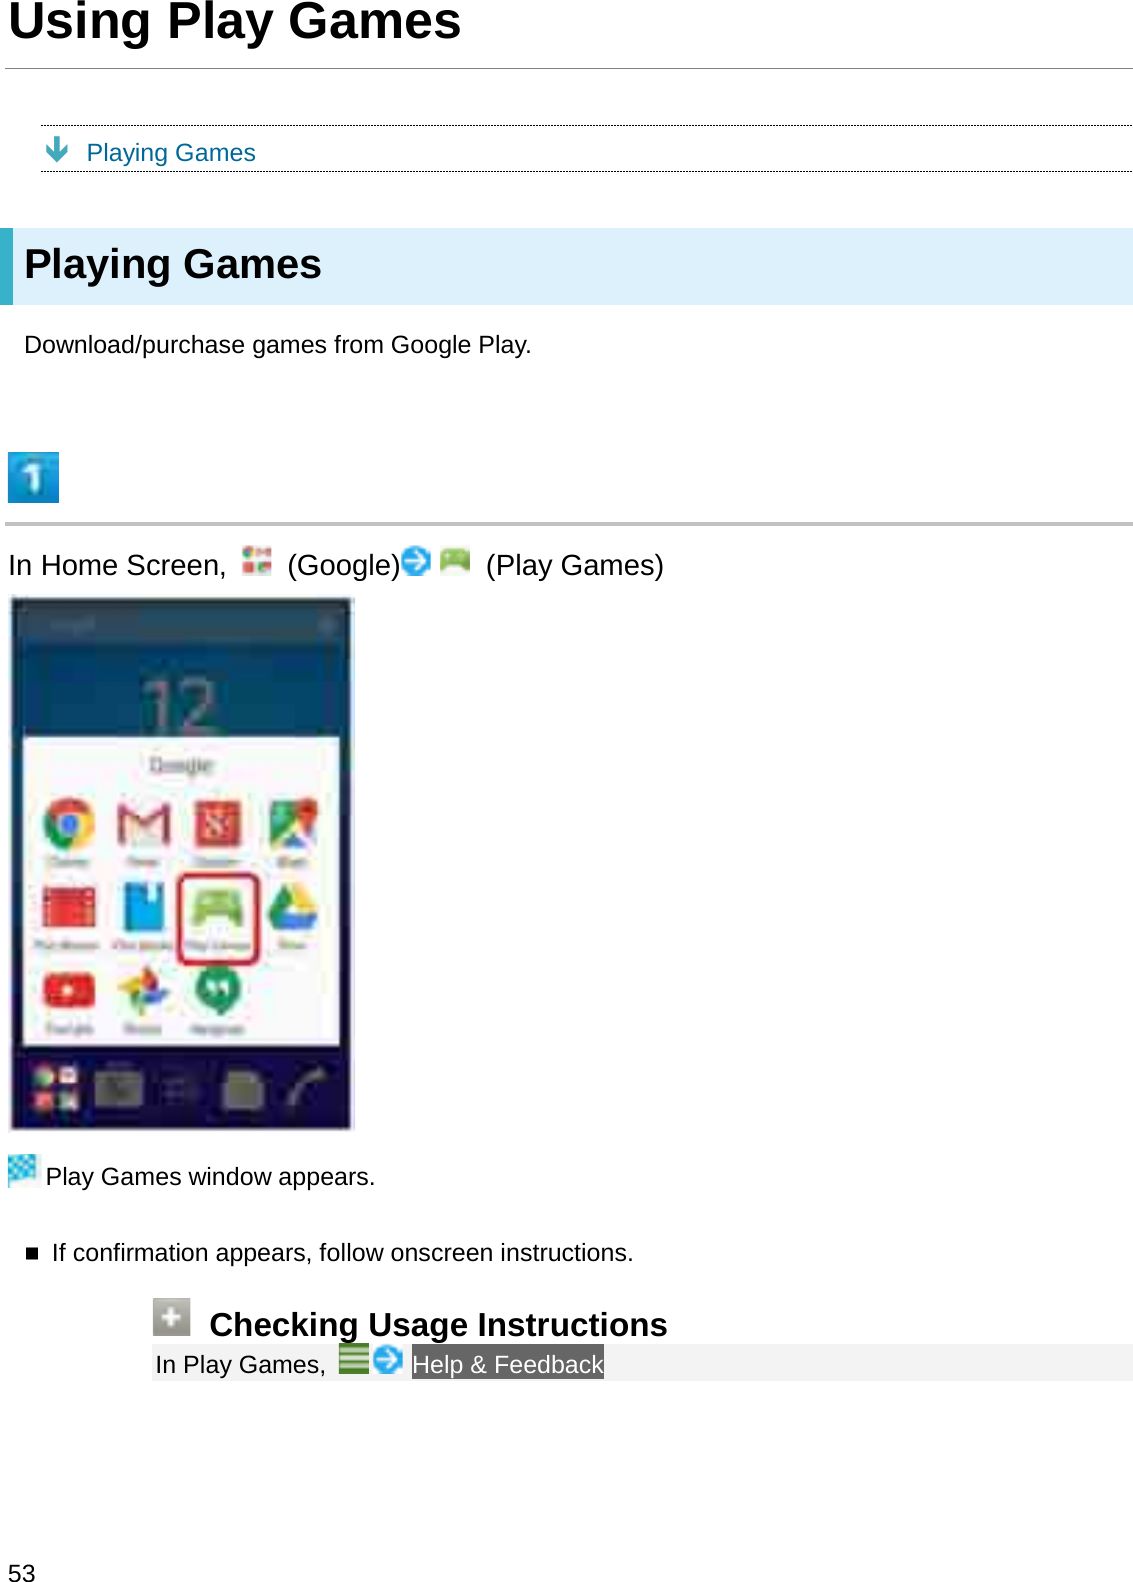 Using Play GamesÐPlaying GamesPlaying GamesDownload/purchase games from Google Play.In Home Screen,  (Google) (Play Games)Play Games window appears.If confirmation appears, follow onscreen instructions.Checking Usage InstructionsIn Play Games,  Help &amp; Feedback53